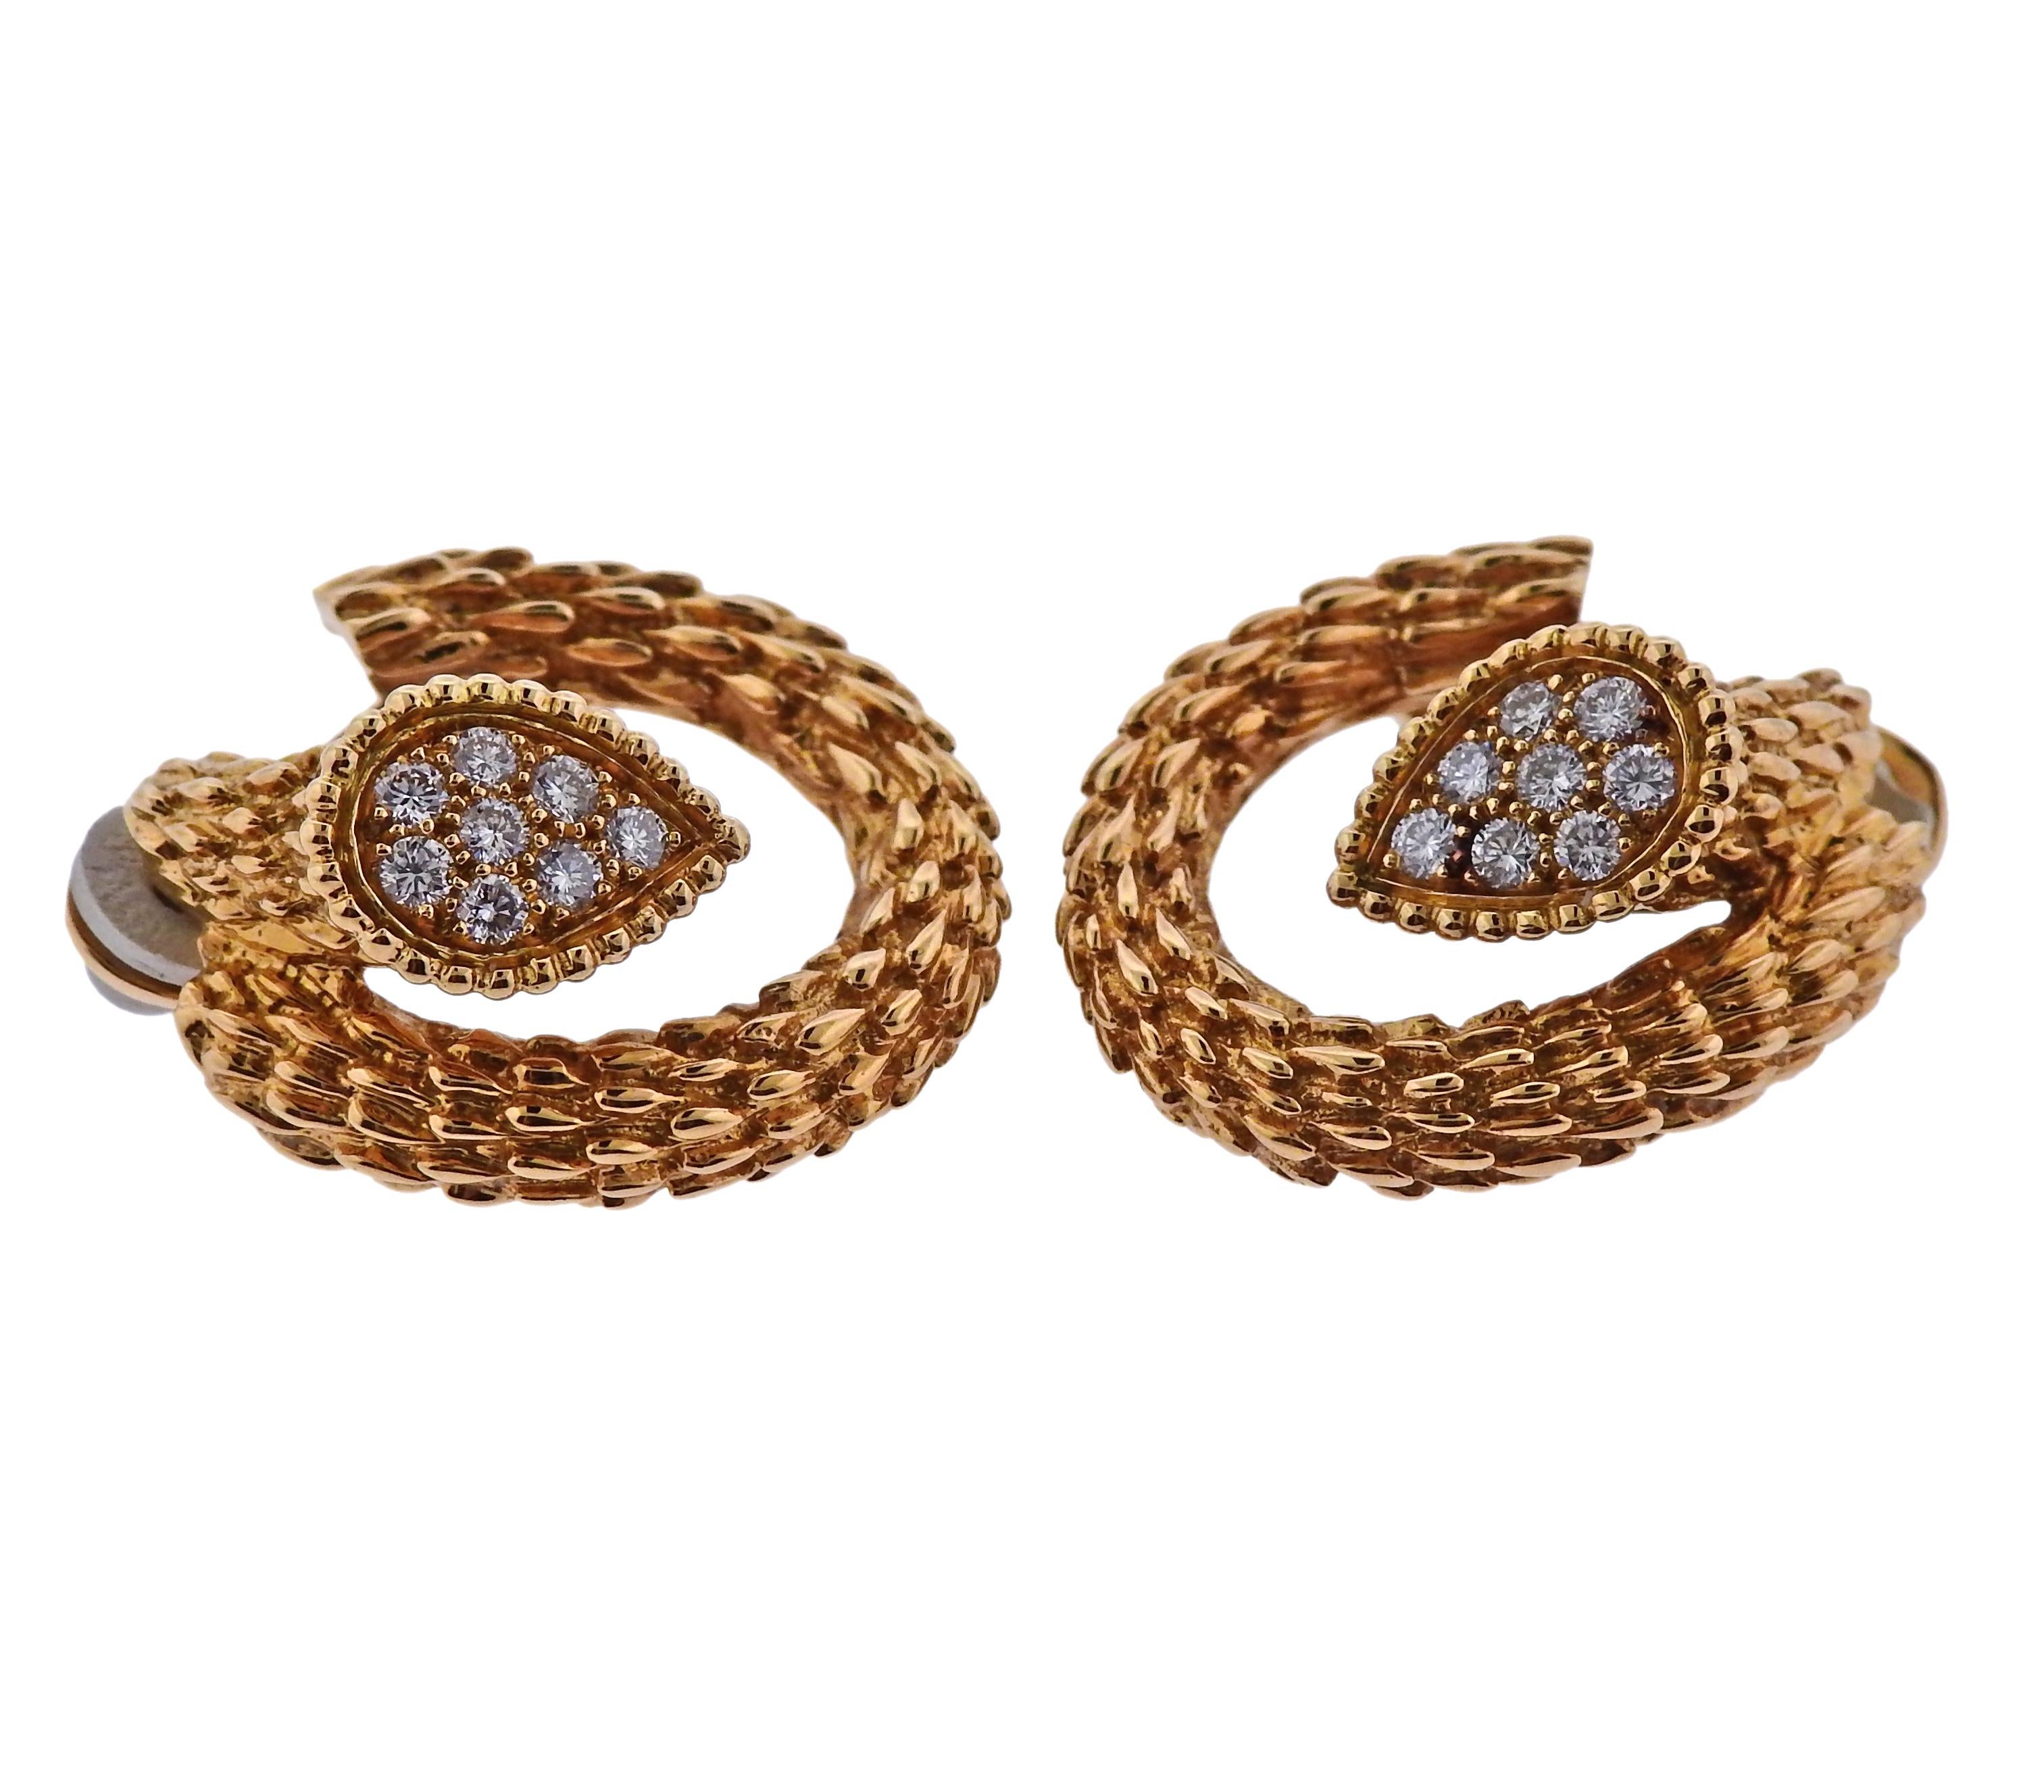 Pair of 18k yellow gold Serpent Boheme earrings, crafted by Boucheron, adorned with approx. 0.50ctw in diamonds. Earrings are 22mm x 22mm, weigh 18.2 grams. Marked: Boucheron, or750, A2991671.